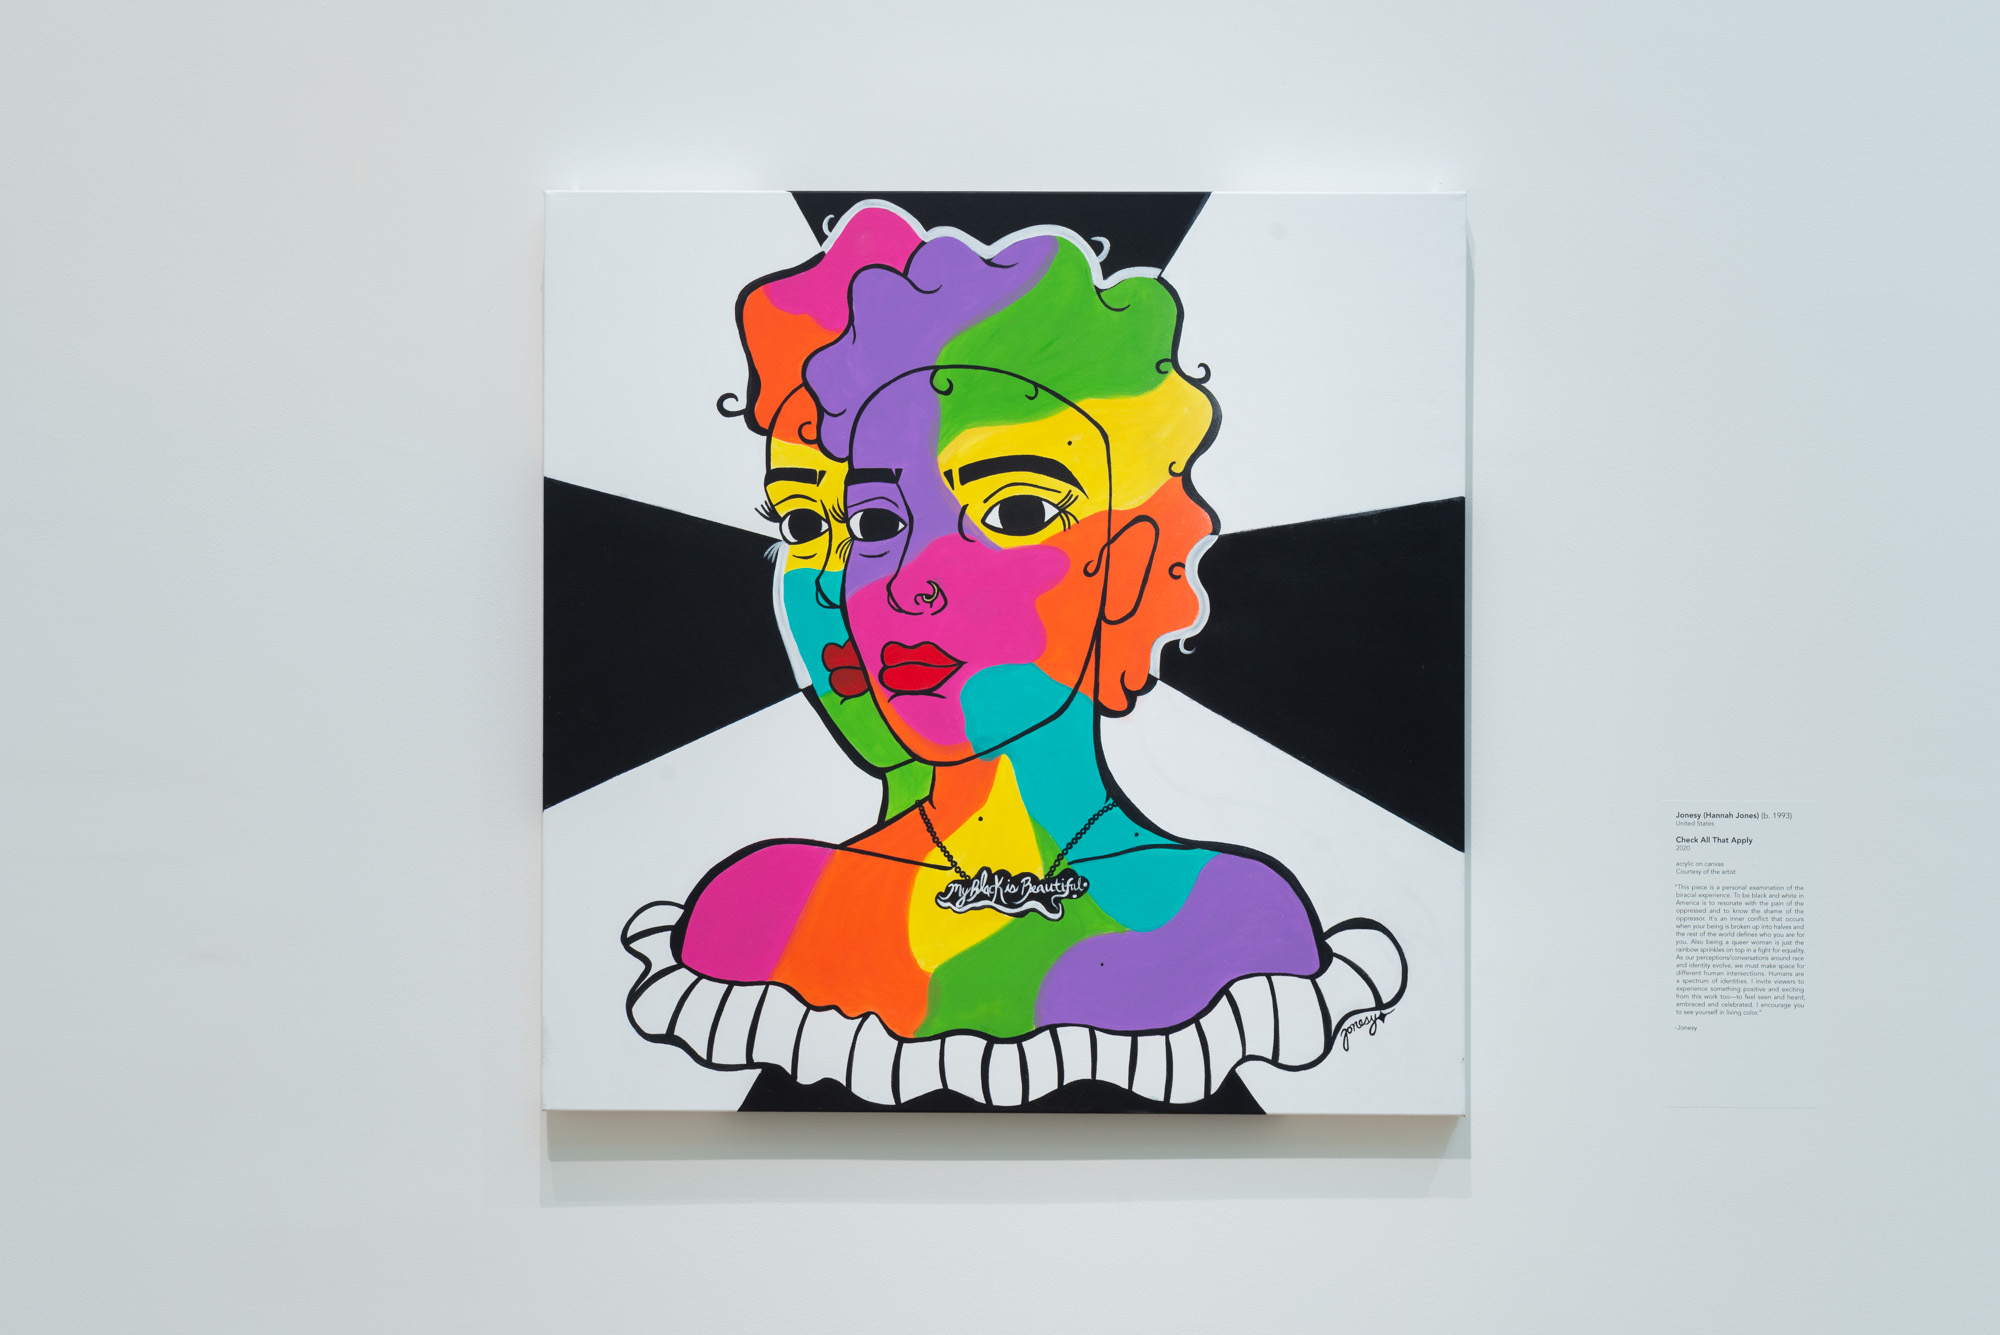 Jonesy's Check All That Apply, a square painting of the bust of a woman. The right side of her face appears a second time shifted just slightly to the left as if to peer over her right shoulder. The woman is filled in with a collage of vivid colors and bright red lipstick. Four black bars appear from behind her and stretch out to the top, bottom, left, and right sides of the painting.